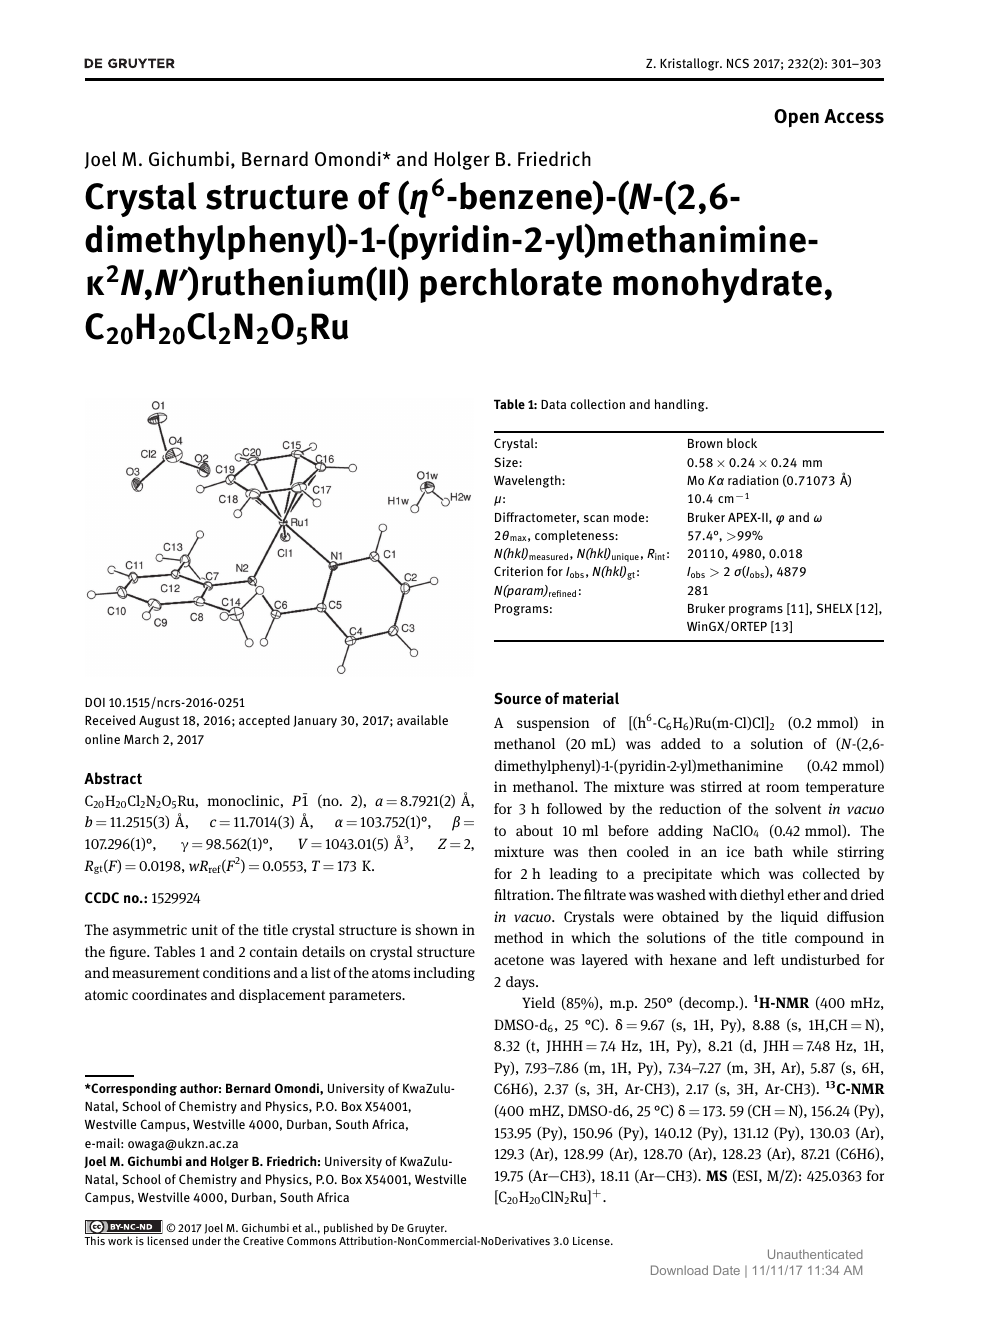 Crystal Structure Of H6 Benzene N 2 6 Dimethylphenyl 1 Pyridin 2 Yl Methanimine K2n N Ruthenium Ii Perchlorate Monohydrate Chcl2n2o5ru Topic Of Research Paper In Chemical Sciences Download Scholarly Article Pdf And Read For Free On